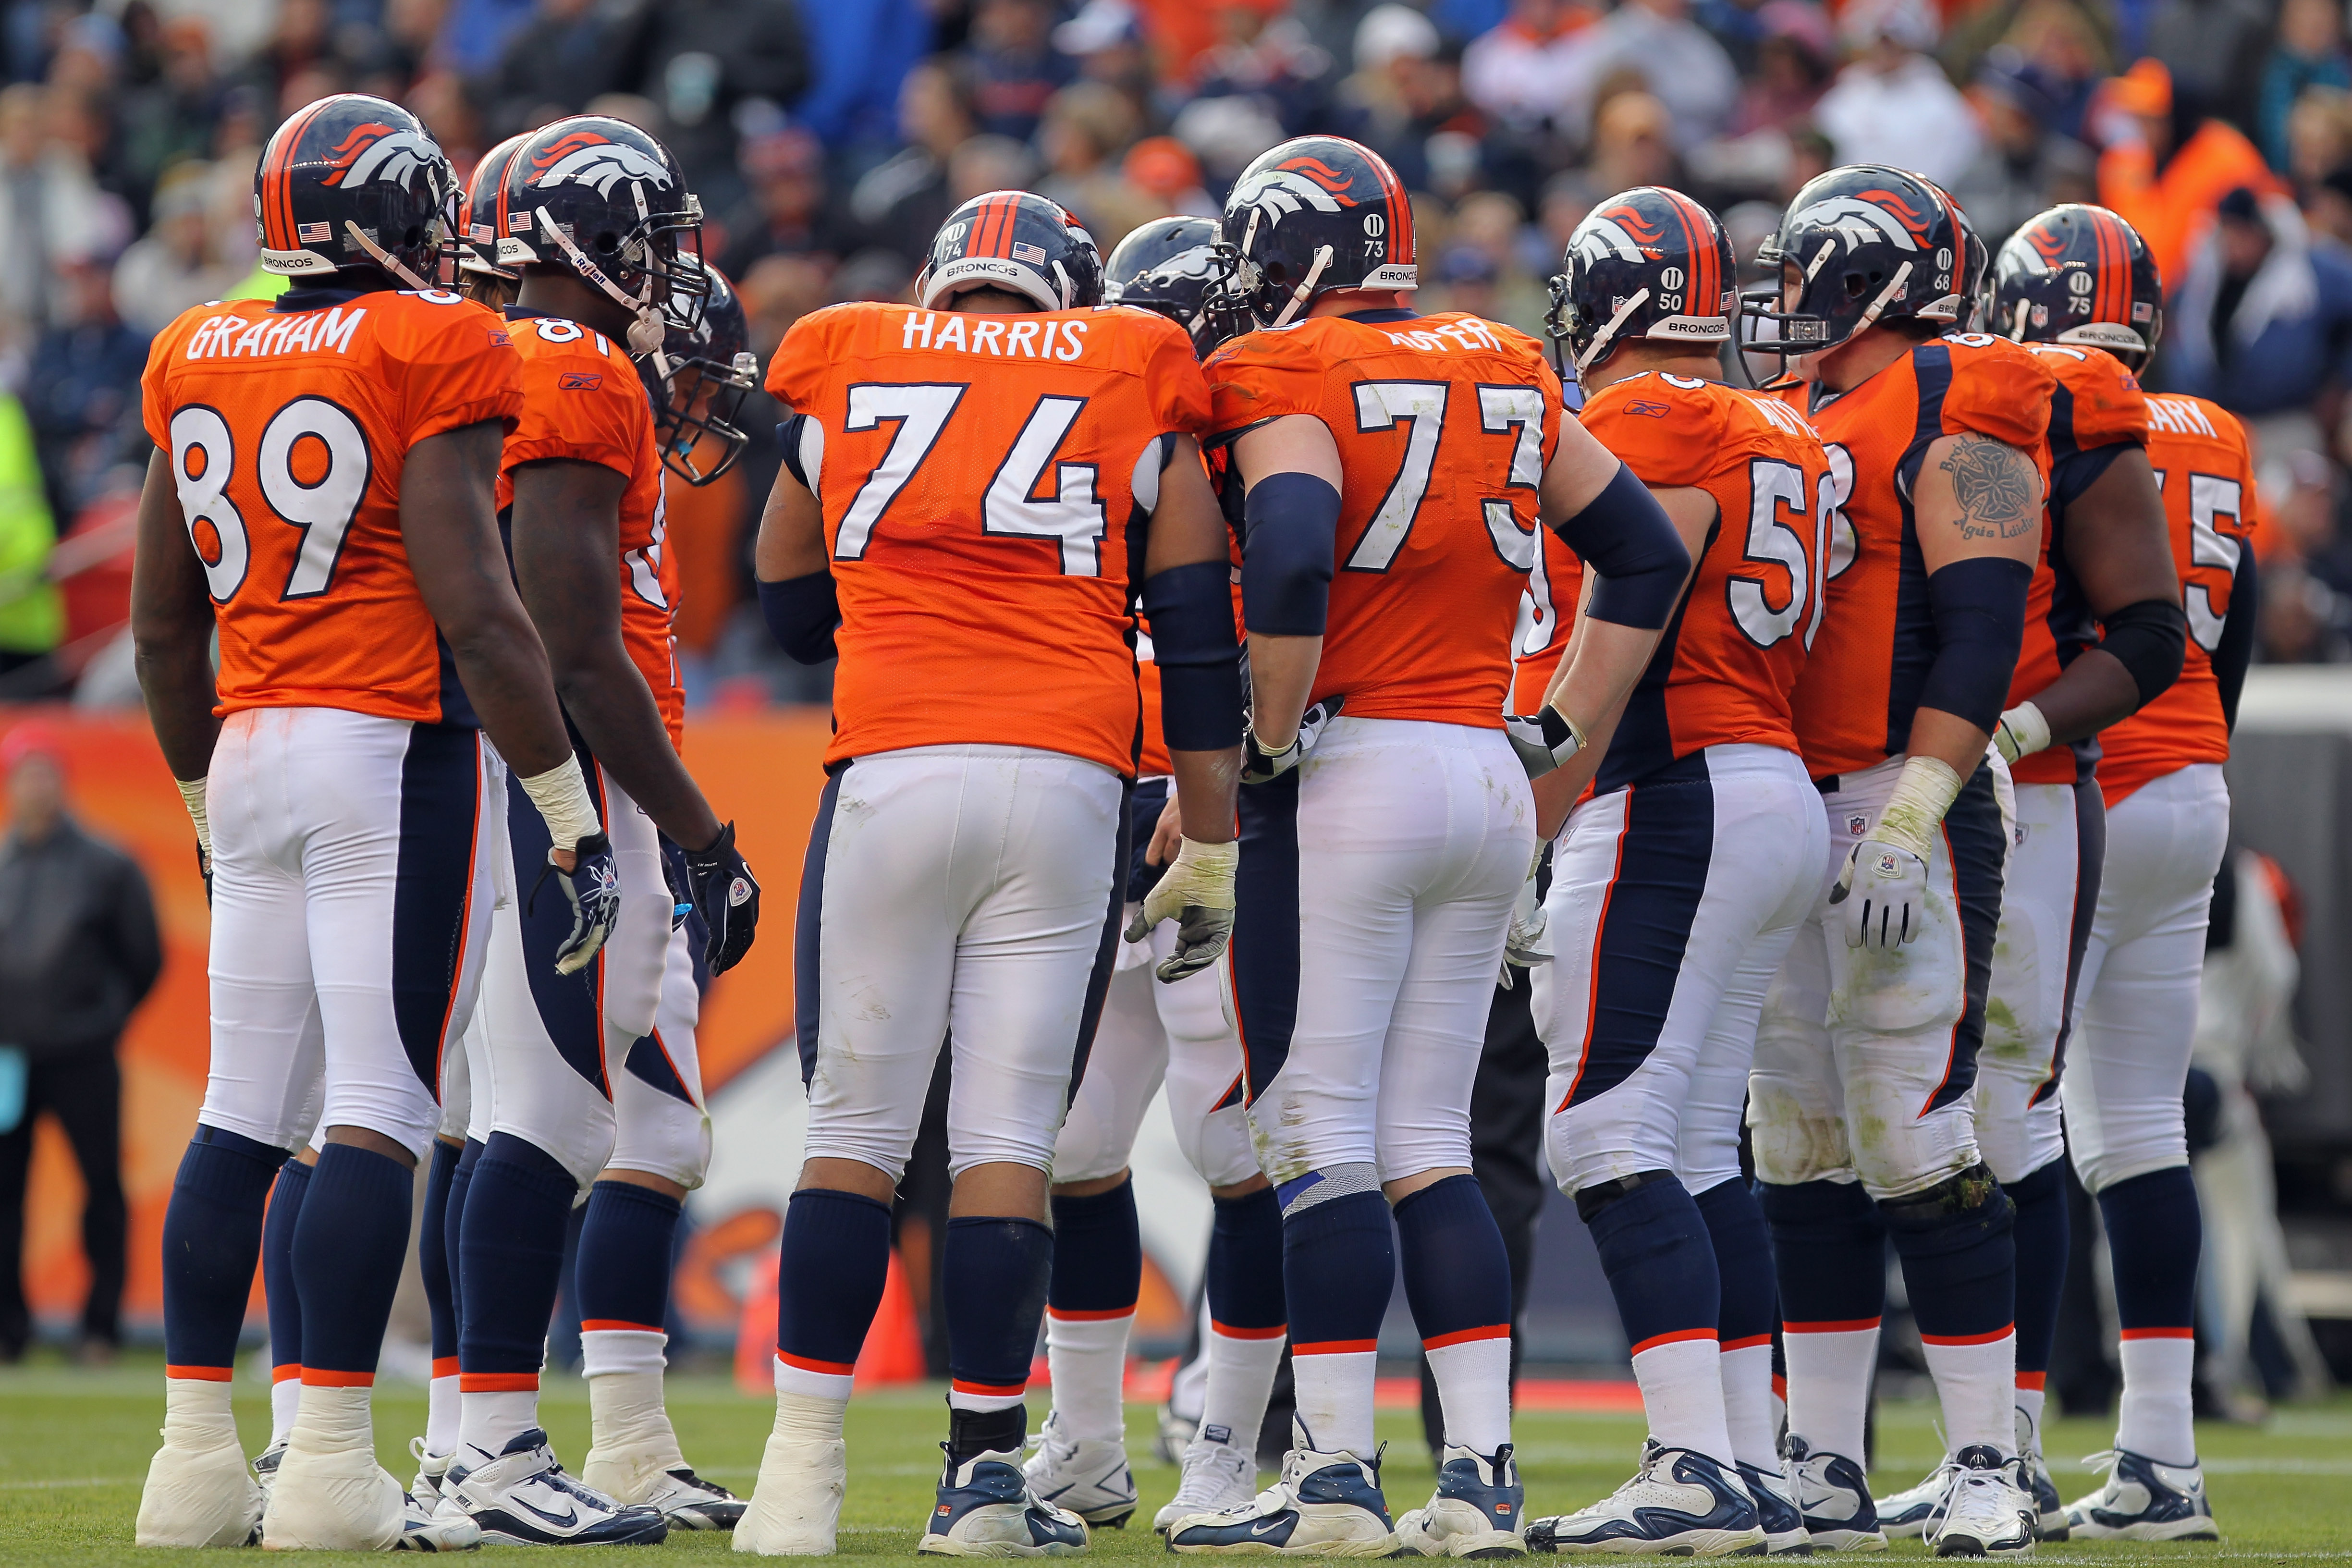 DENVER - NOVEMBER 14:  The Denver Broncos offensive huddles up to face the Kansas City Chiefs at INVESCO Field at Mile High on November 14, 2010 in Denver, Colorado. The Broncos defeated the Chiefs 49-29.  (Photo by Doug Pensinger/Getty Images)